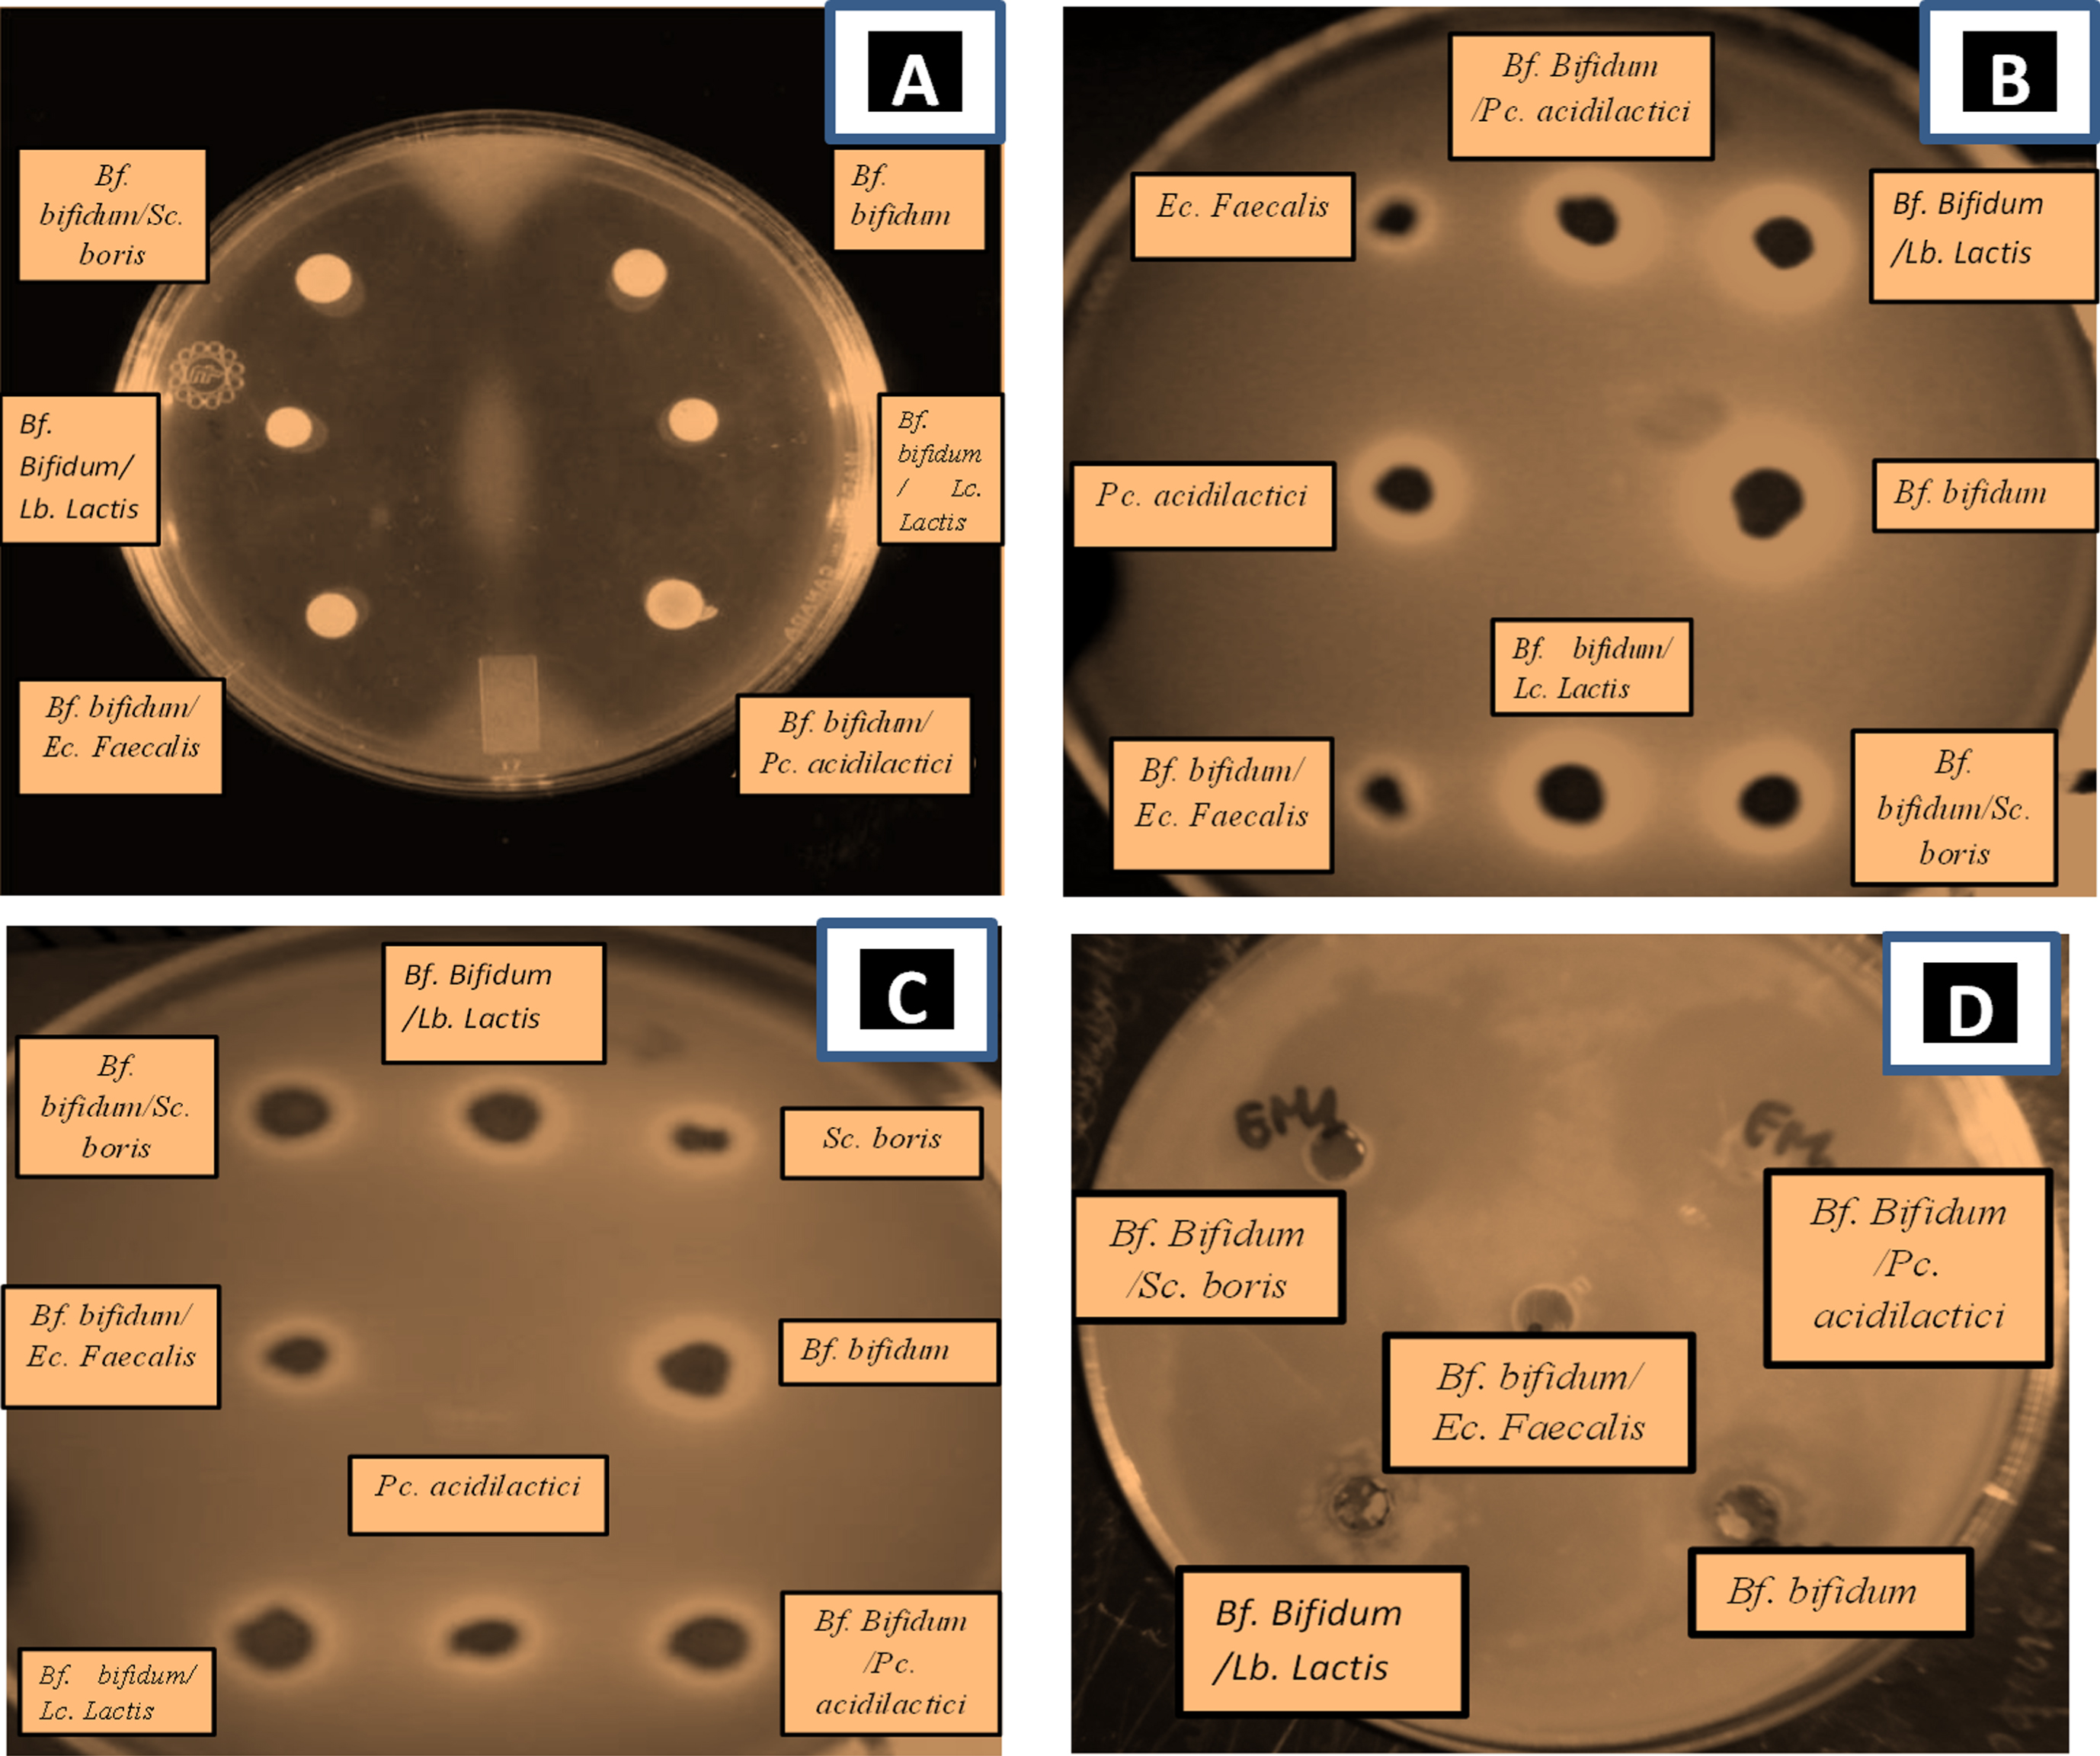 Agar-well diffusion showing inhibition zones from antimicrobial activity of supernatants- LAB and Bf. bifidum BHI 07 grown alone or in combination with lactic acid bacteria grown in skim milk either alone or in combination with LAB: Lc. Lactis, Pc. Acidilactici, Sc. Boris, Ec. Faecalis, Lb. Lactis, on A) E. coli, B) S. aureus, C) Bacillus cereus, D) Salmonella typhimurium. Analyses were carried out using Muller-Hinton agar. Clear area is zone of inhibition.